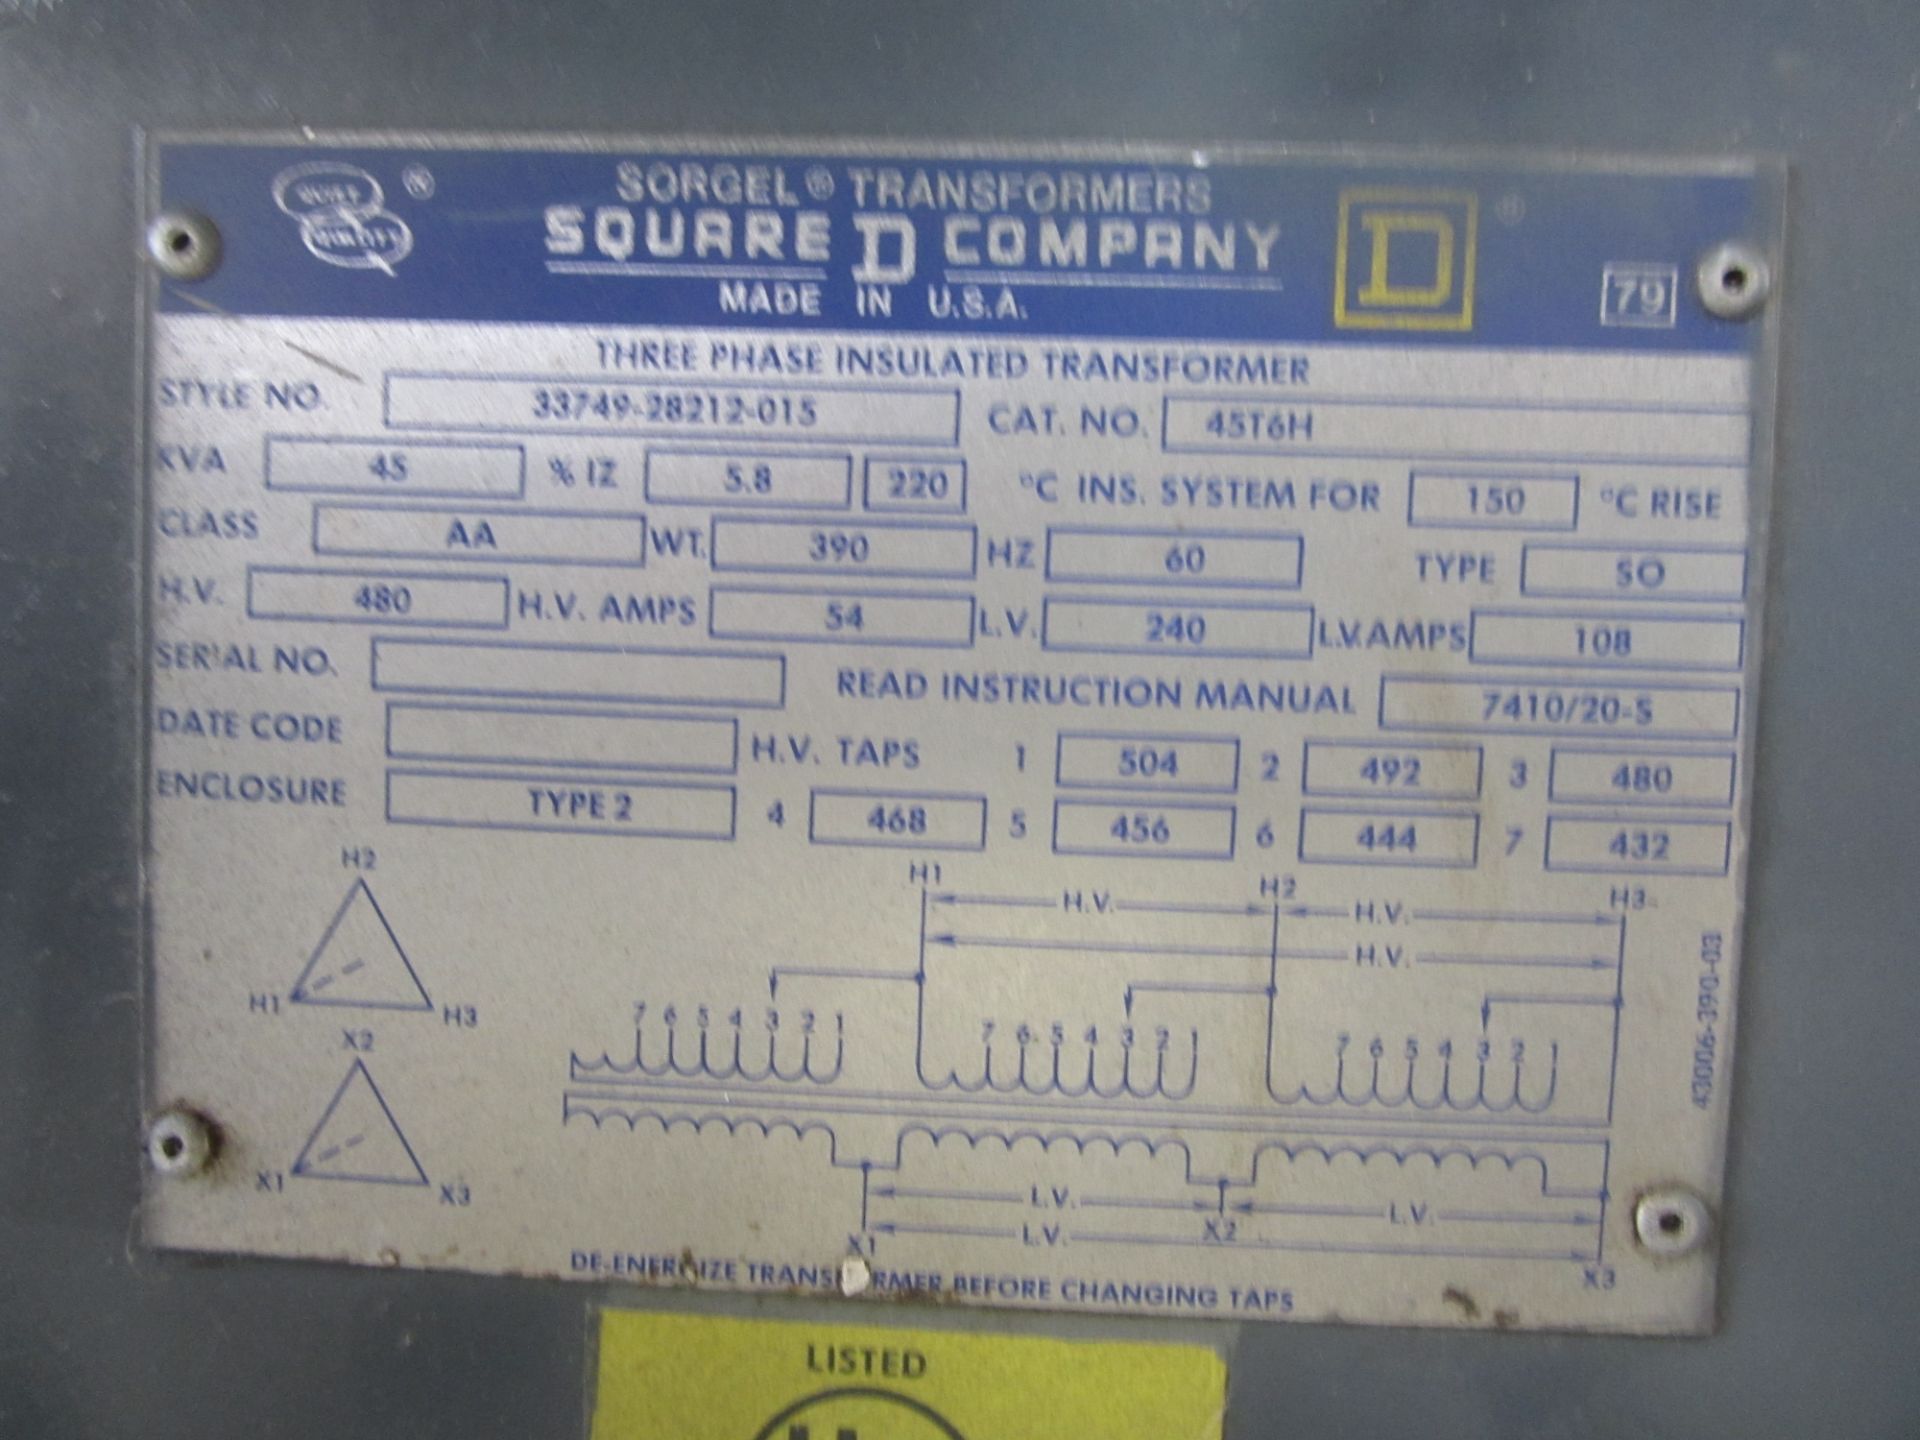 Square D 45 KVA, 3 Phase Transformer, 480 HV, 240 LV, with Square D 60 Amp Disconnect Box - Image 2 of 3